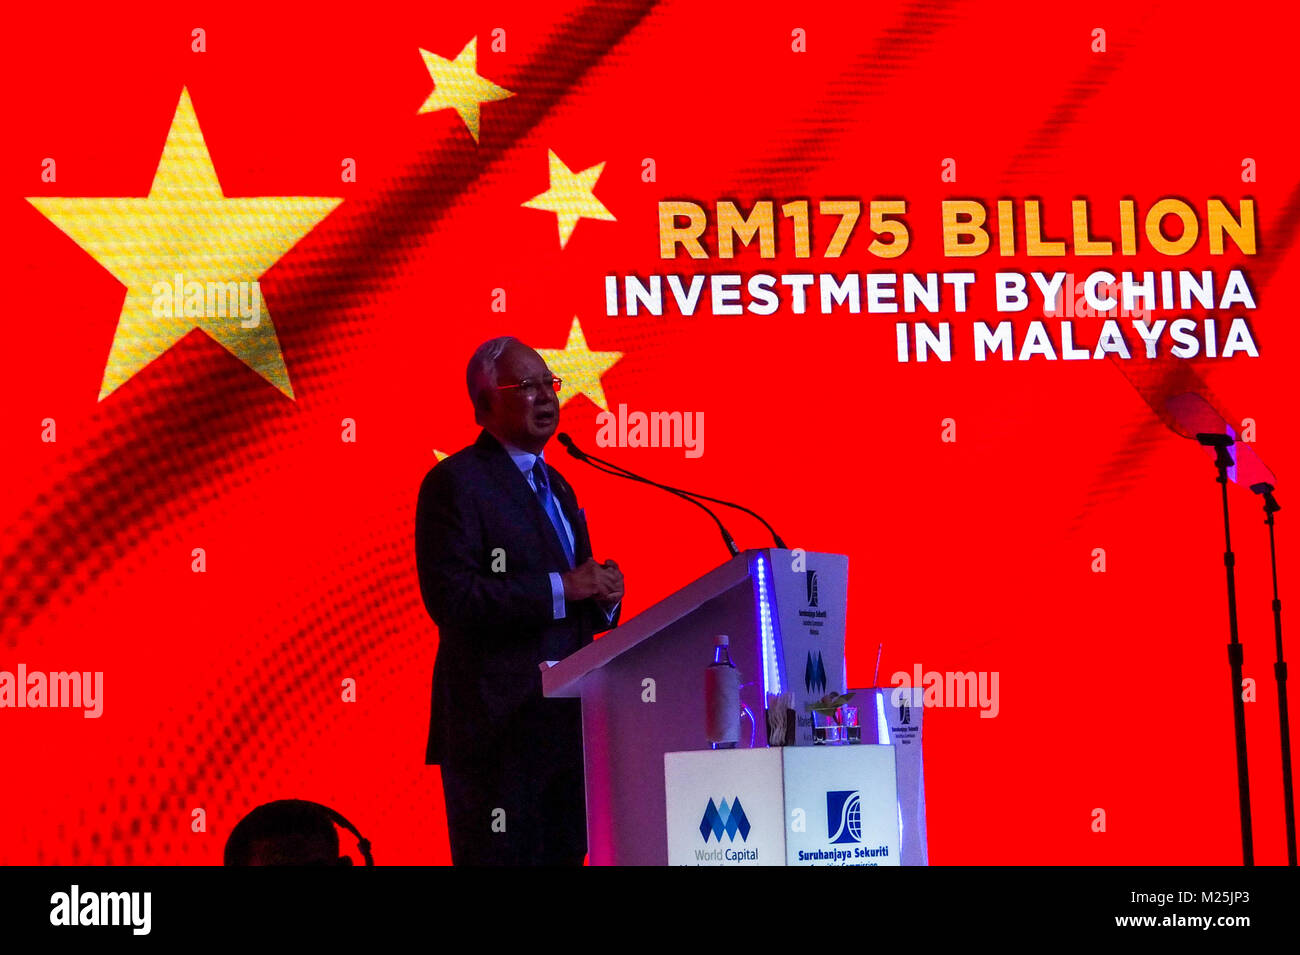 KUALA LUMPUR, MALAYSIA - FEBRUARY 06: Malaysia Prime Minister Najib Razak give a speech during World Capital Market Symposium 2018 in Kuala Lumpur on February 6, 2018. According to Najib Razak speech Malaysia has always been an example of stability and moderation, open to friendship with all, in keeping with our past as a seafaring, trading nation, a multi-ethnic. Malaysia became the first country in ASEAN to estabilish diplomatic relations with China also have signed comprehensive and strategic partnership with a number of countries, including teh United States, India, China and Japan . (Phot Stock Photo